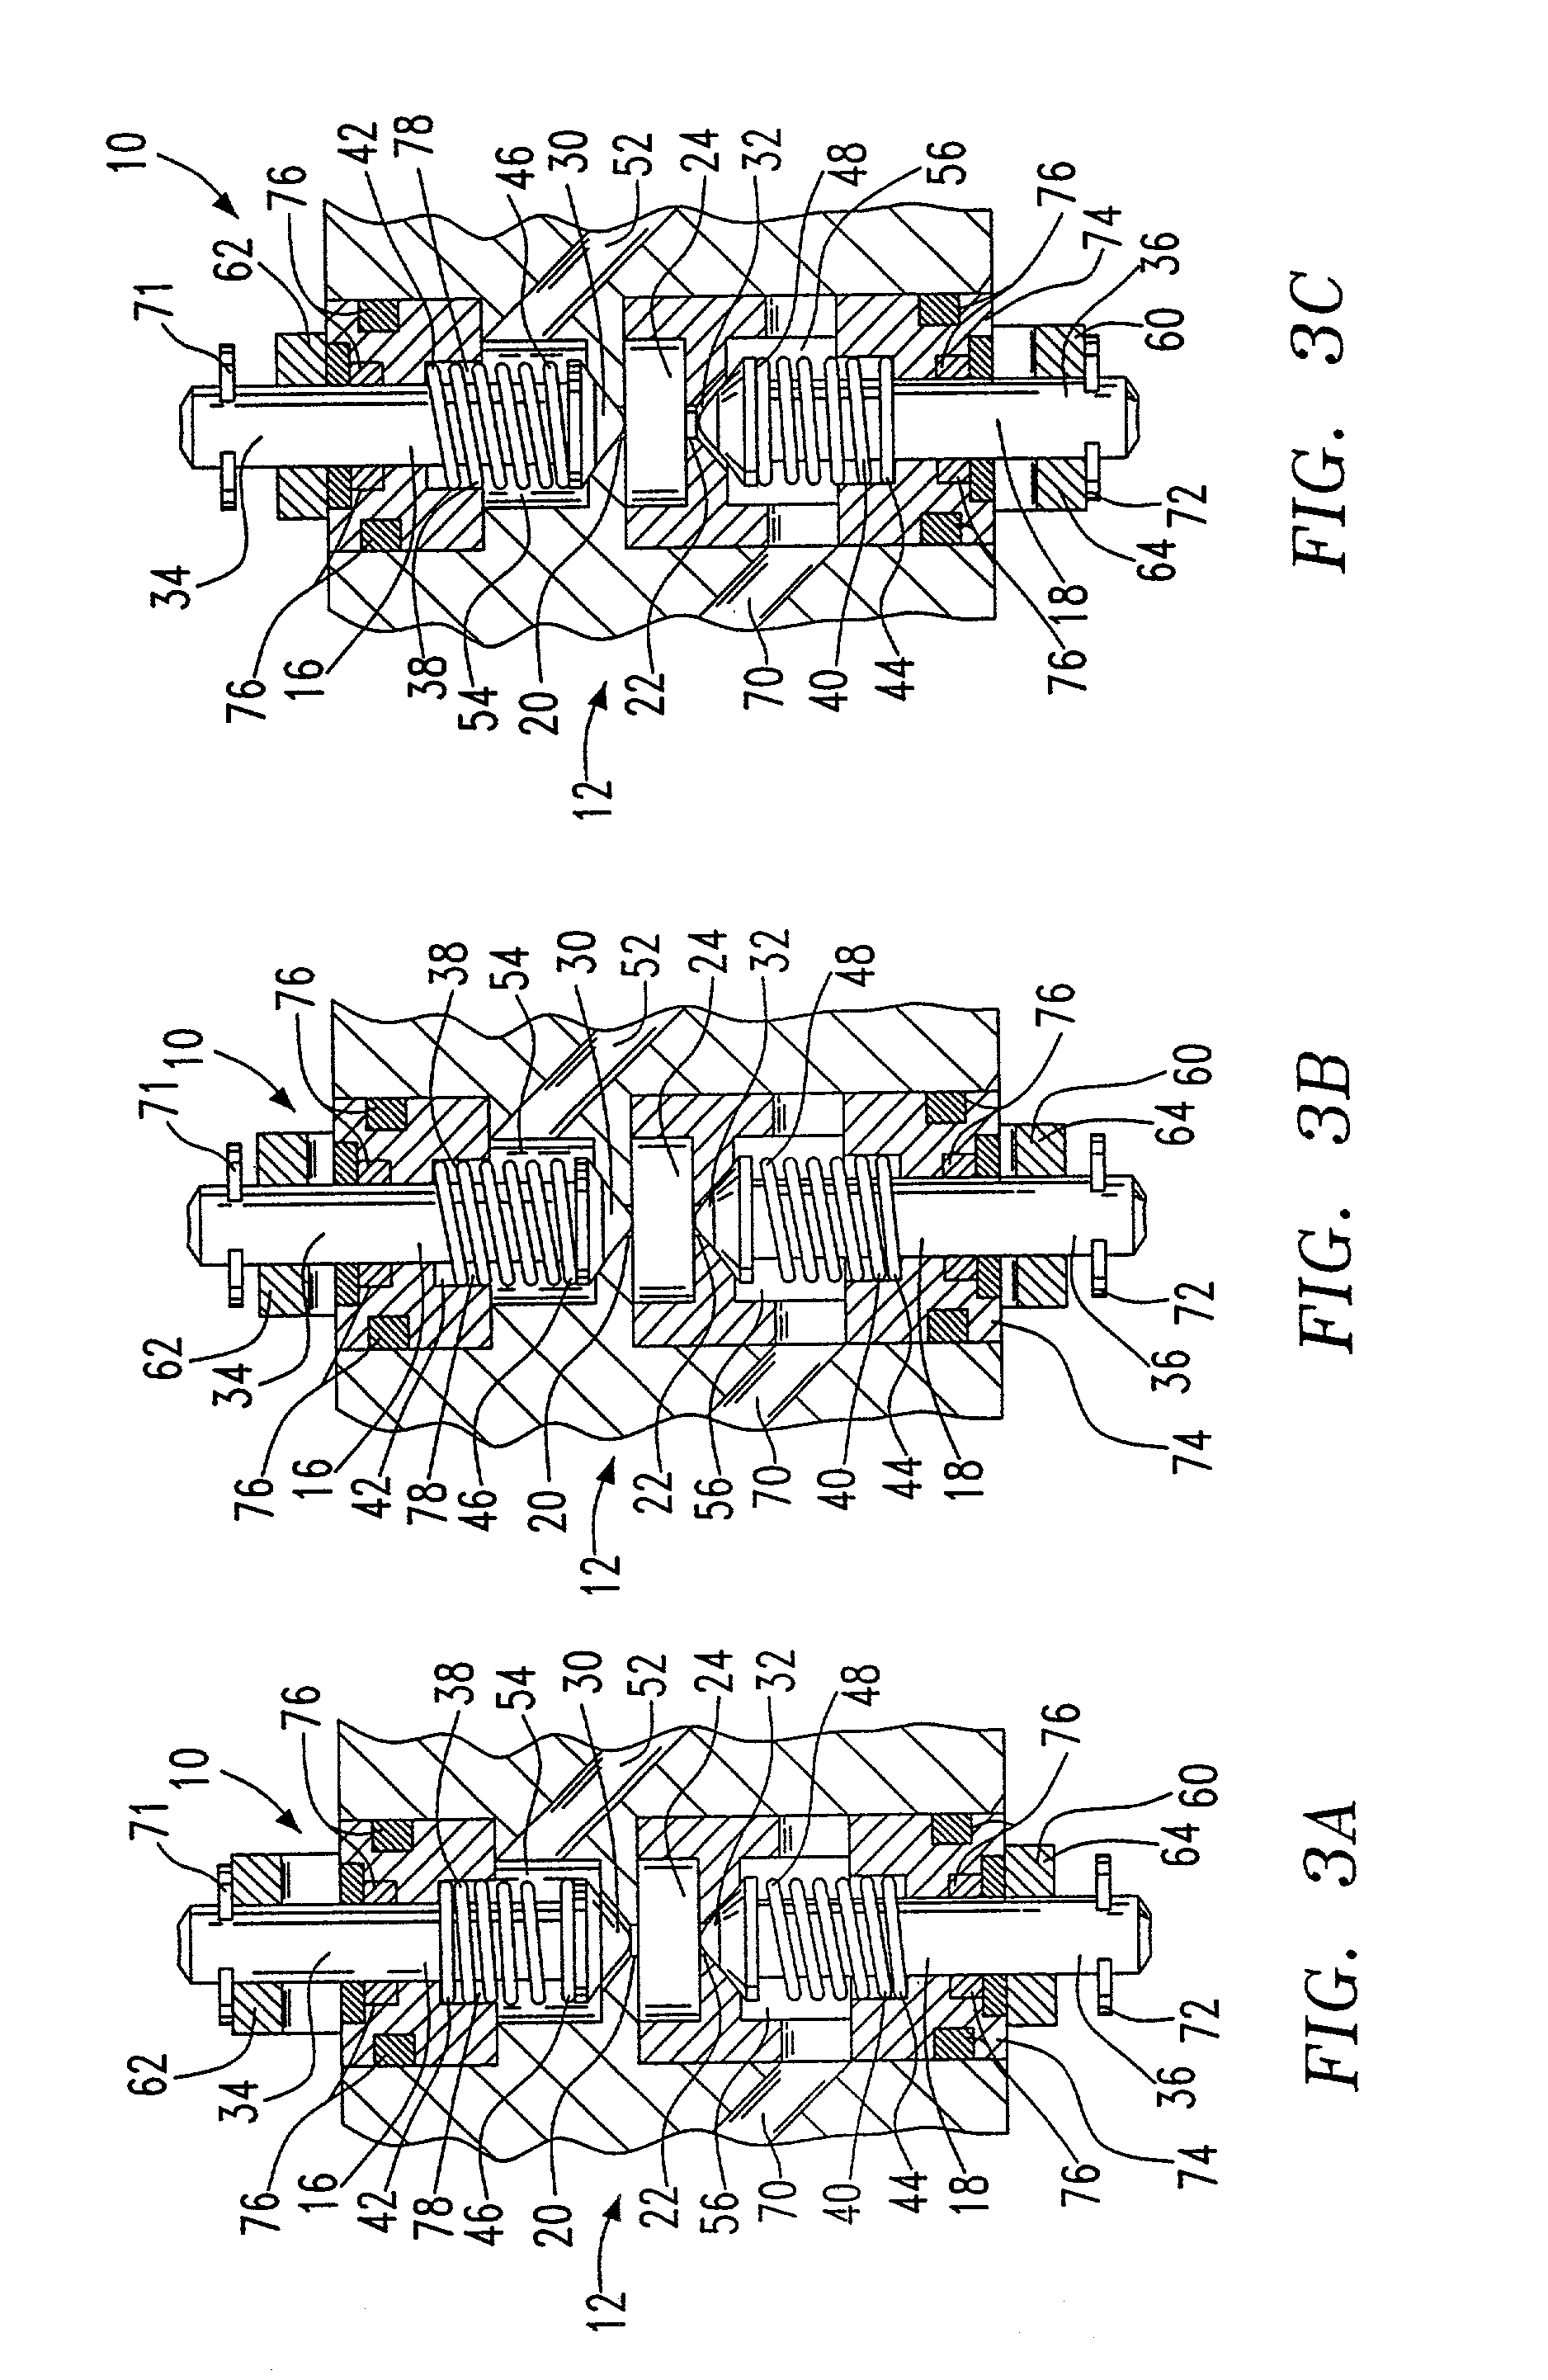 Variable volume valve for a combustion powered tool